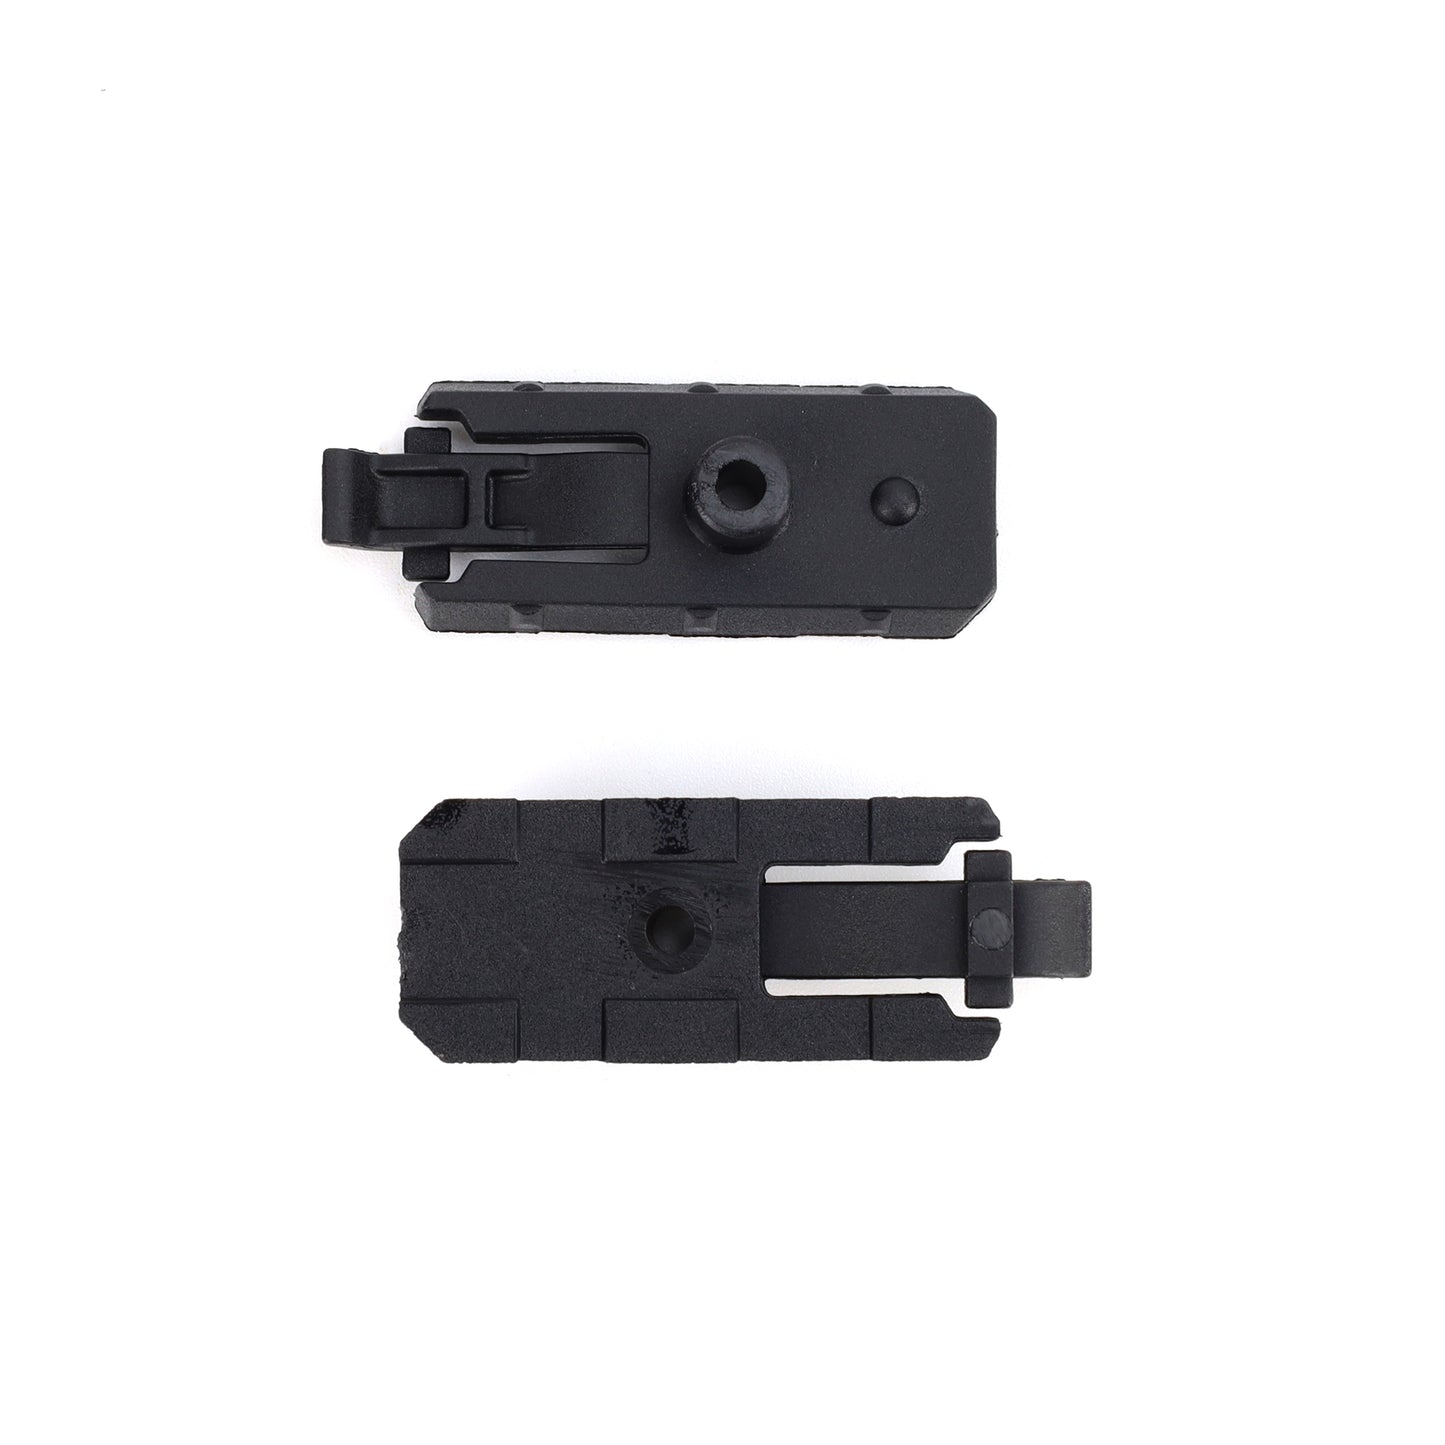 Replacement ARC Rail Helmet Dovetail Adapters for Ops-Core AMP Headset